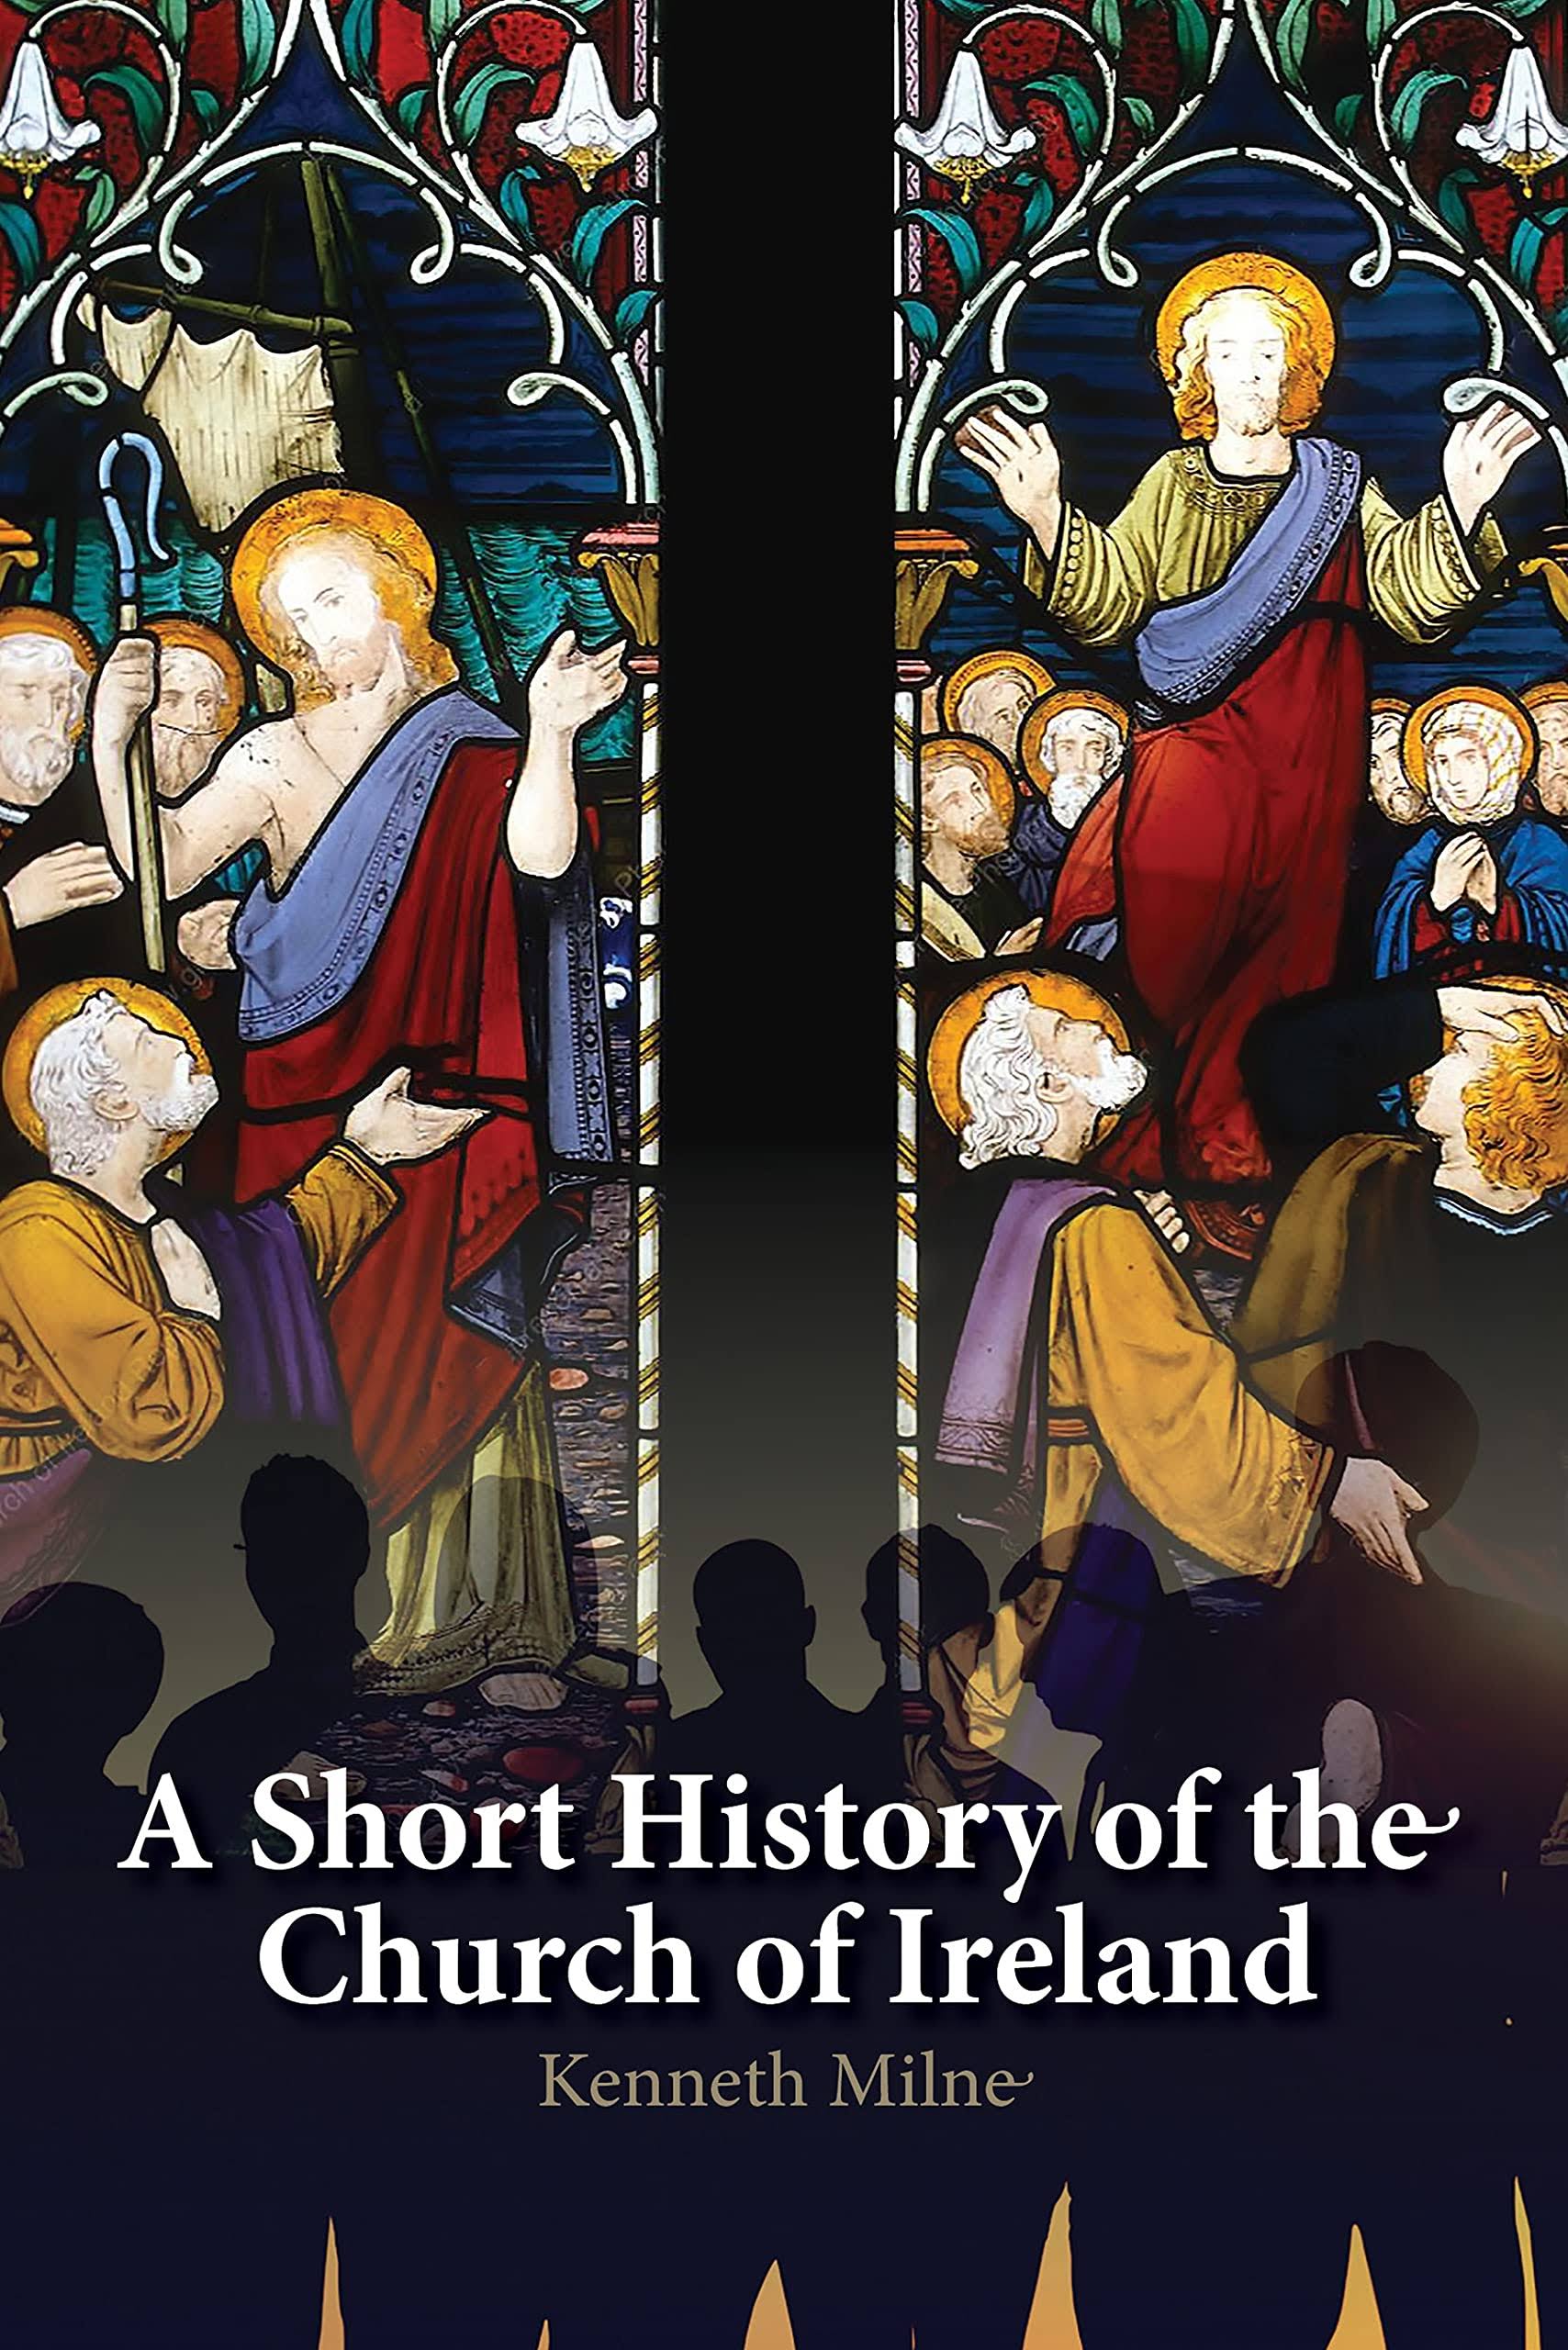 A Short History of The Church of Ireland